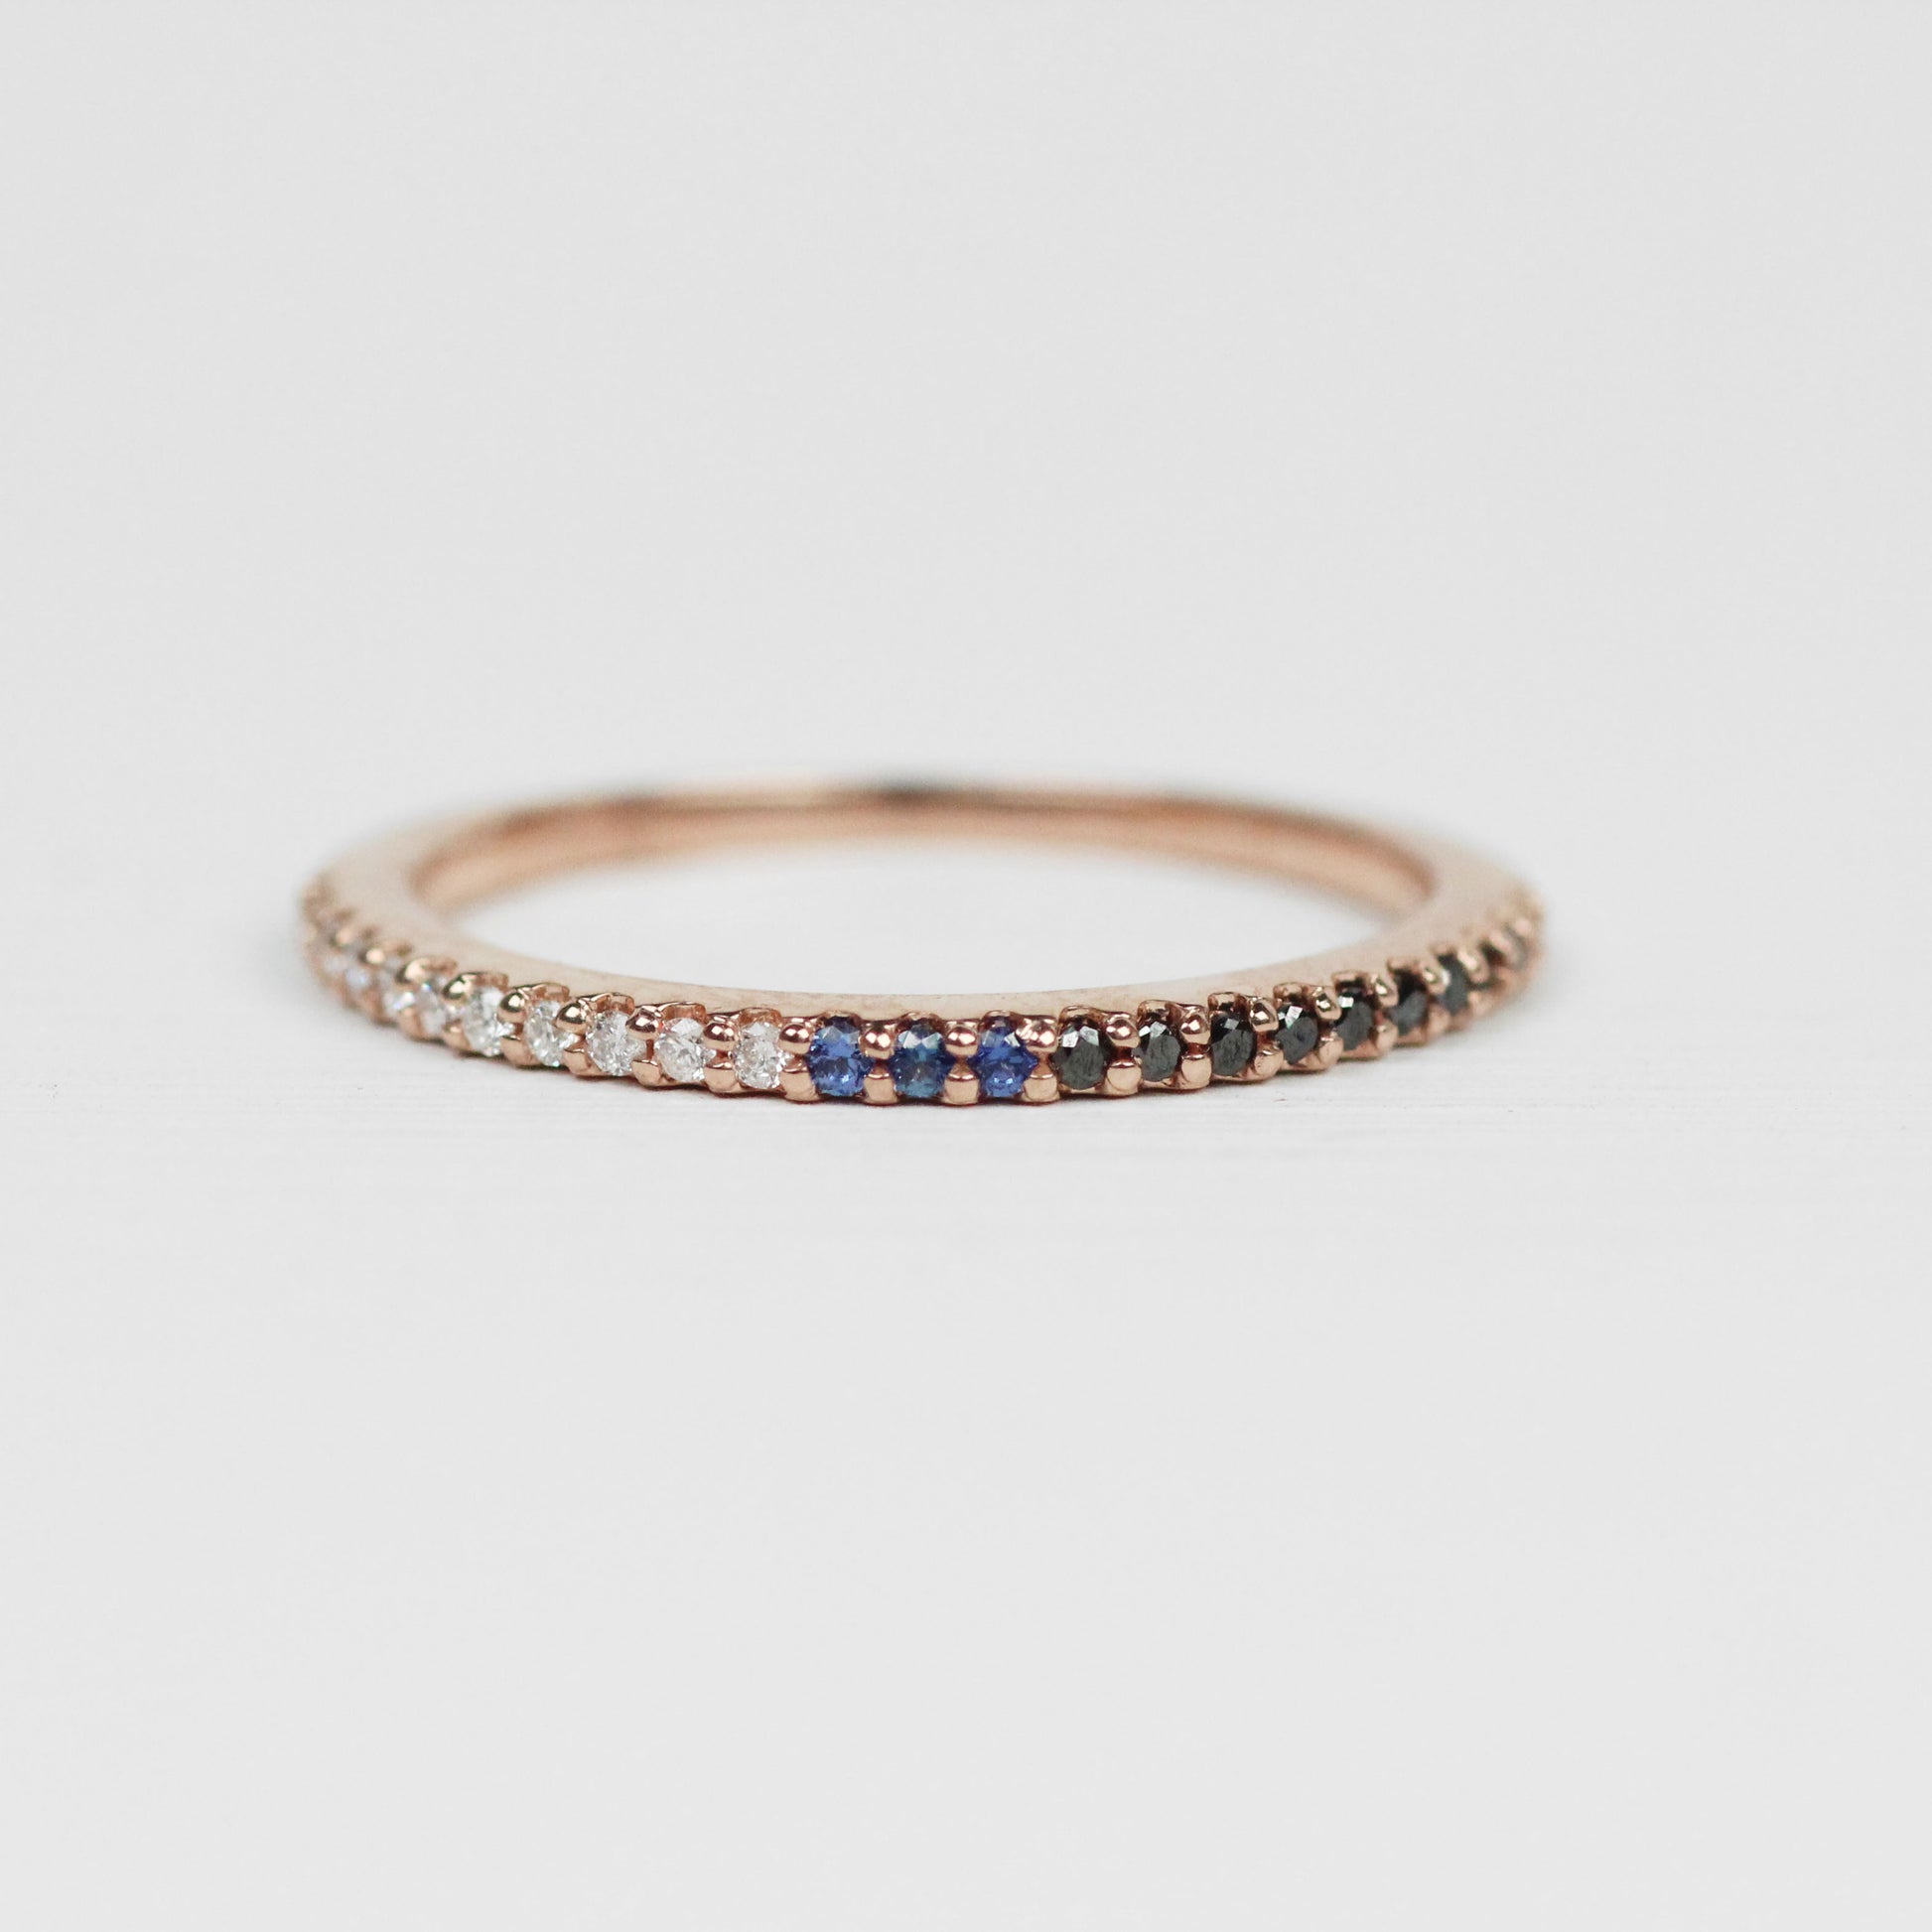 Multi-toned Constance - Pave set, minimal diamond wedding stacking band - Midwinter Co. Alternative Bridal Rings and Modern Fine Jewelry